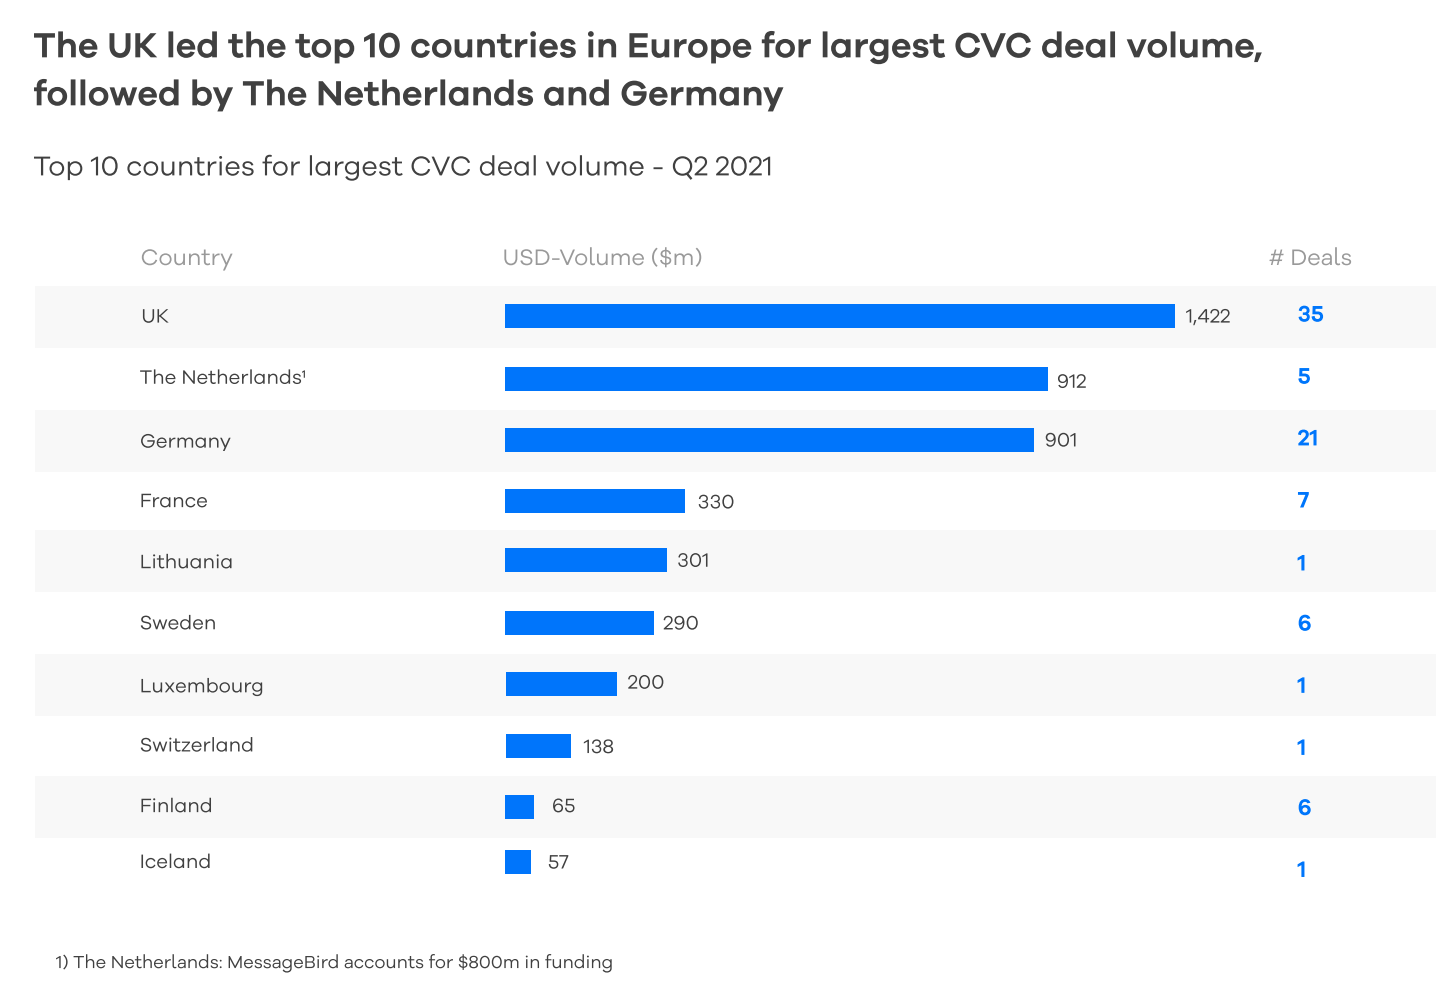 Top 10 countries in Europe for CVC deal volumes